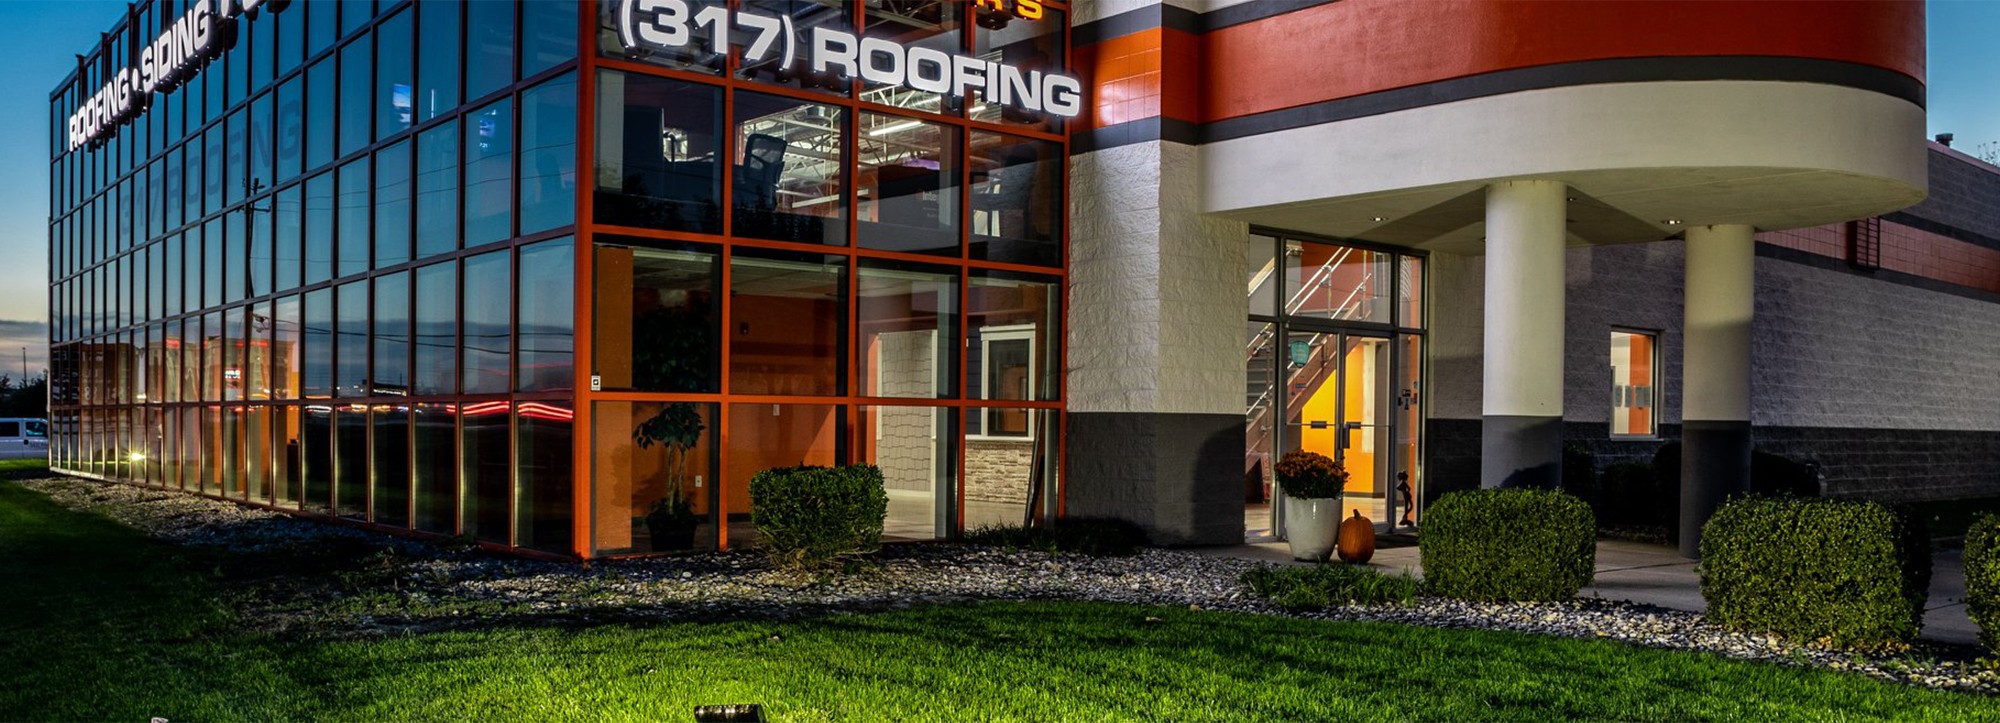 Cochran Exteriors' Office in Indianapolis